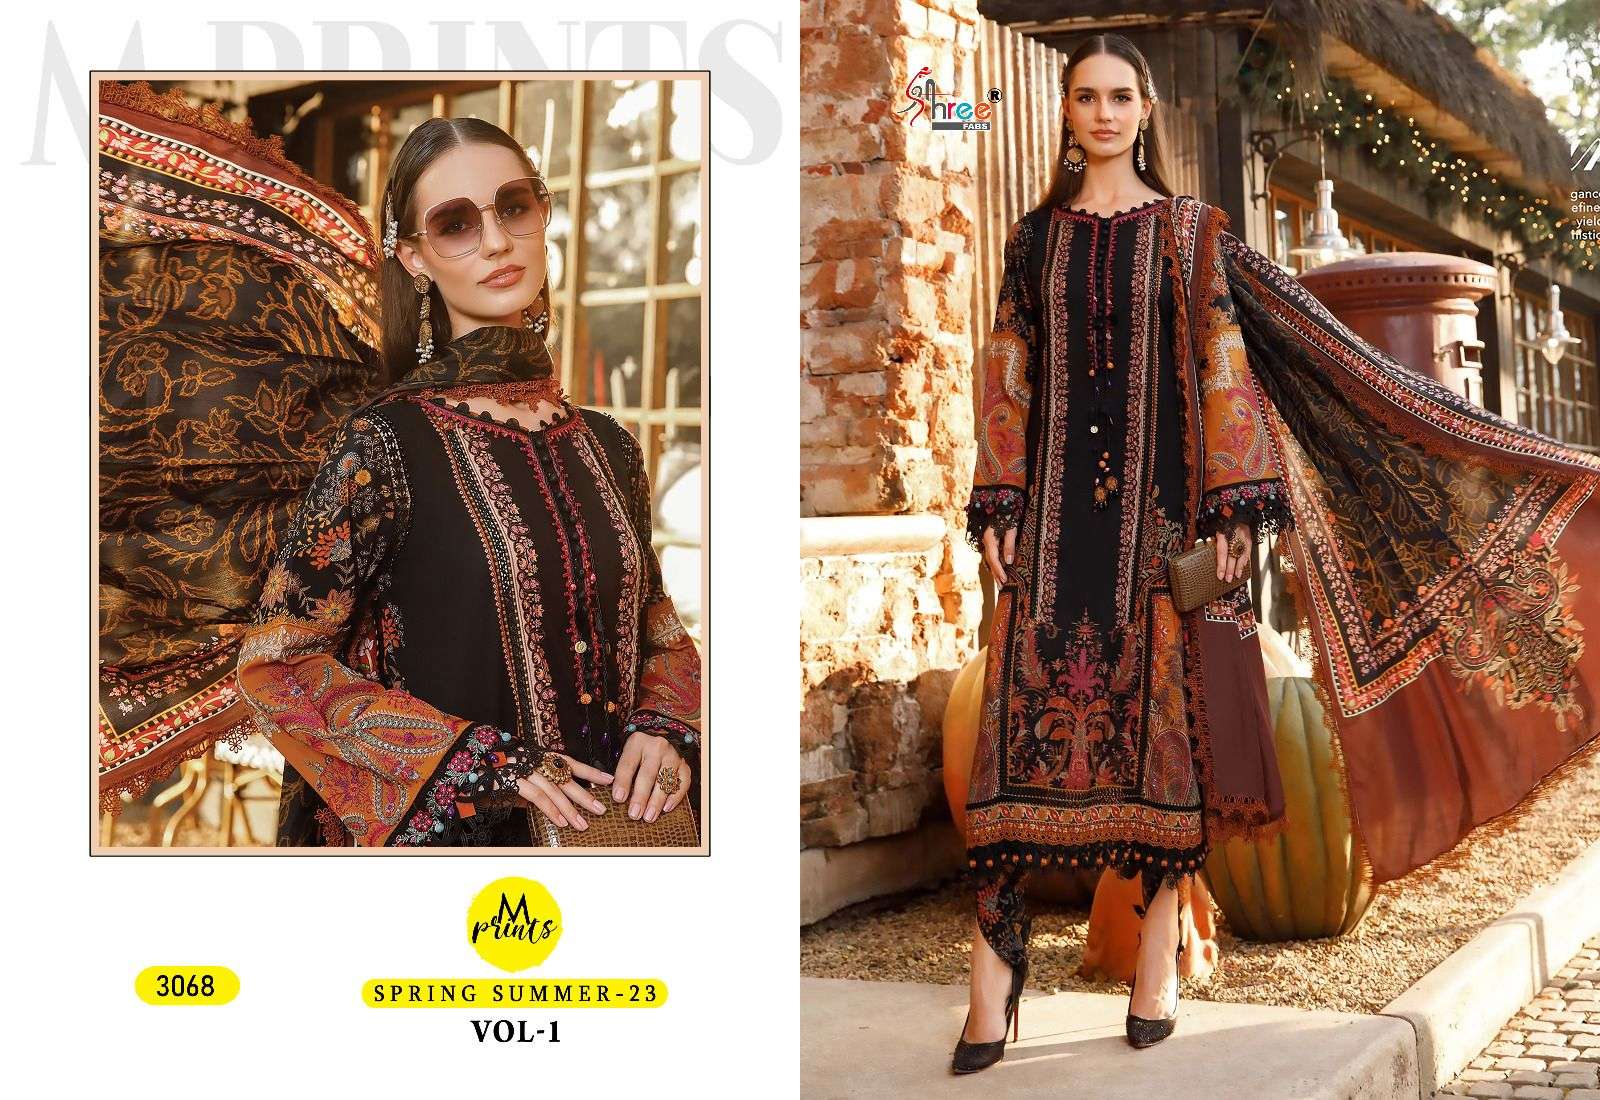 Mprints Spring Summer-23 Vol-2 By Shree Fabs 3062 To 3068 Series Beautiful Pakistani Suits Colorful Stylish Fancy Casual Wear & Ethnic Wear Pure Cotton Print With Embroidered Dresses At Wholesale Price